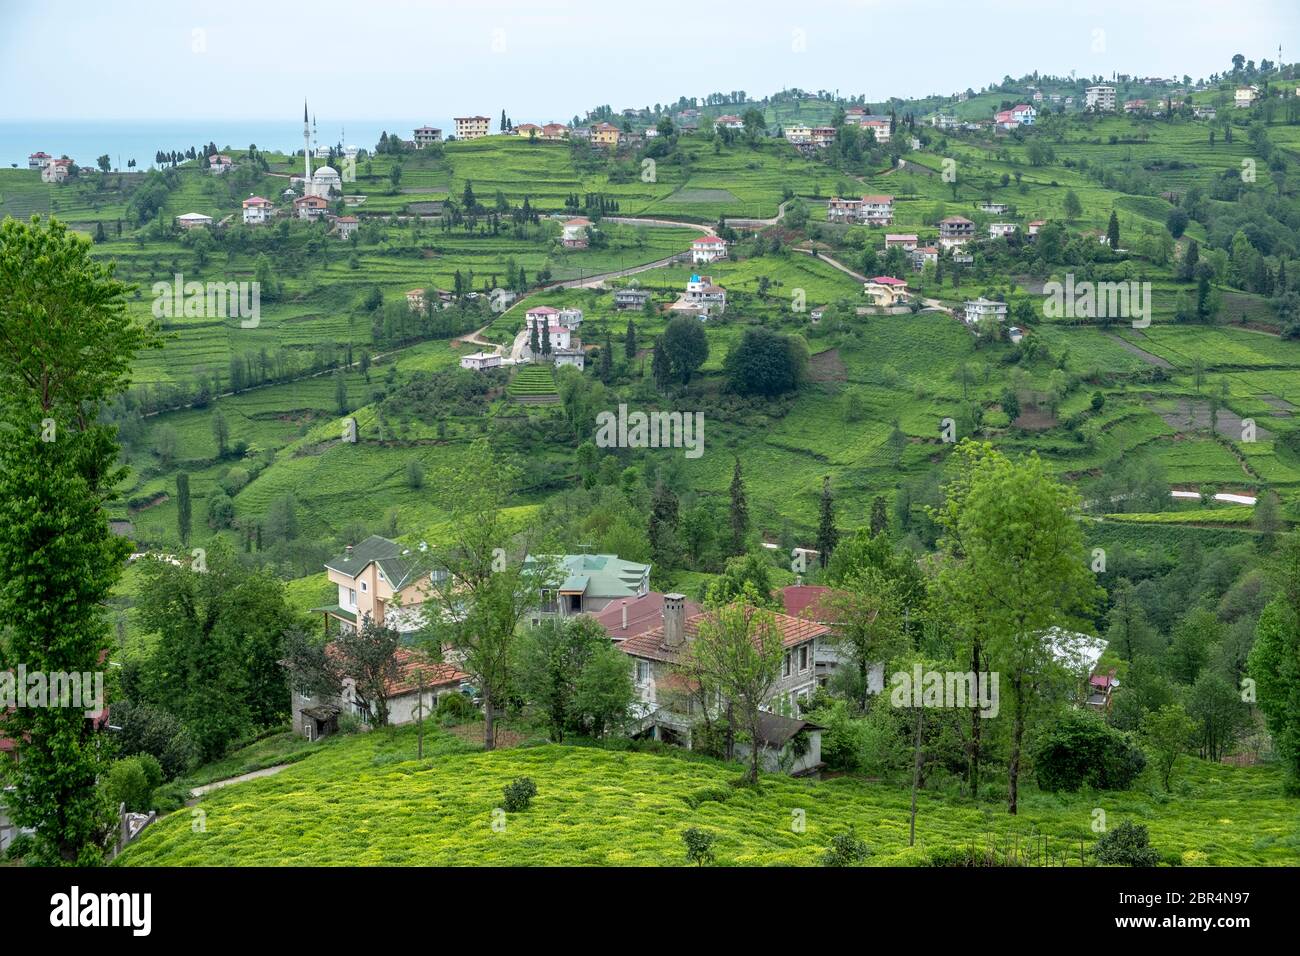 Villages between tea plantations in iyidere district of Rize province Stock Photo